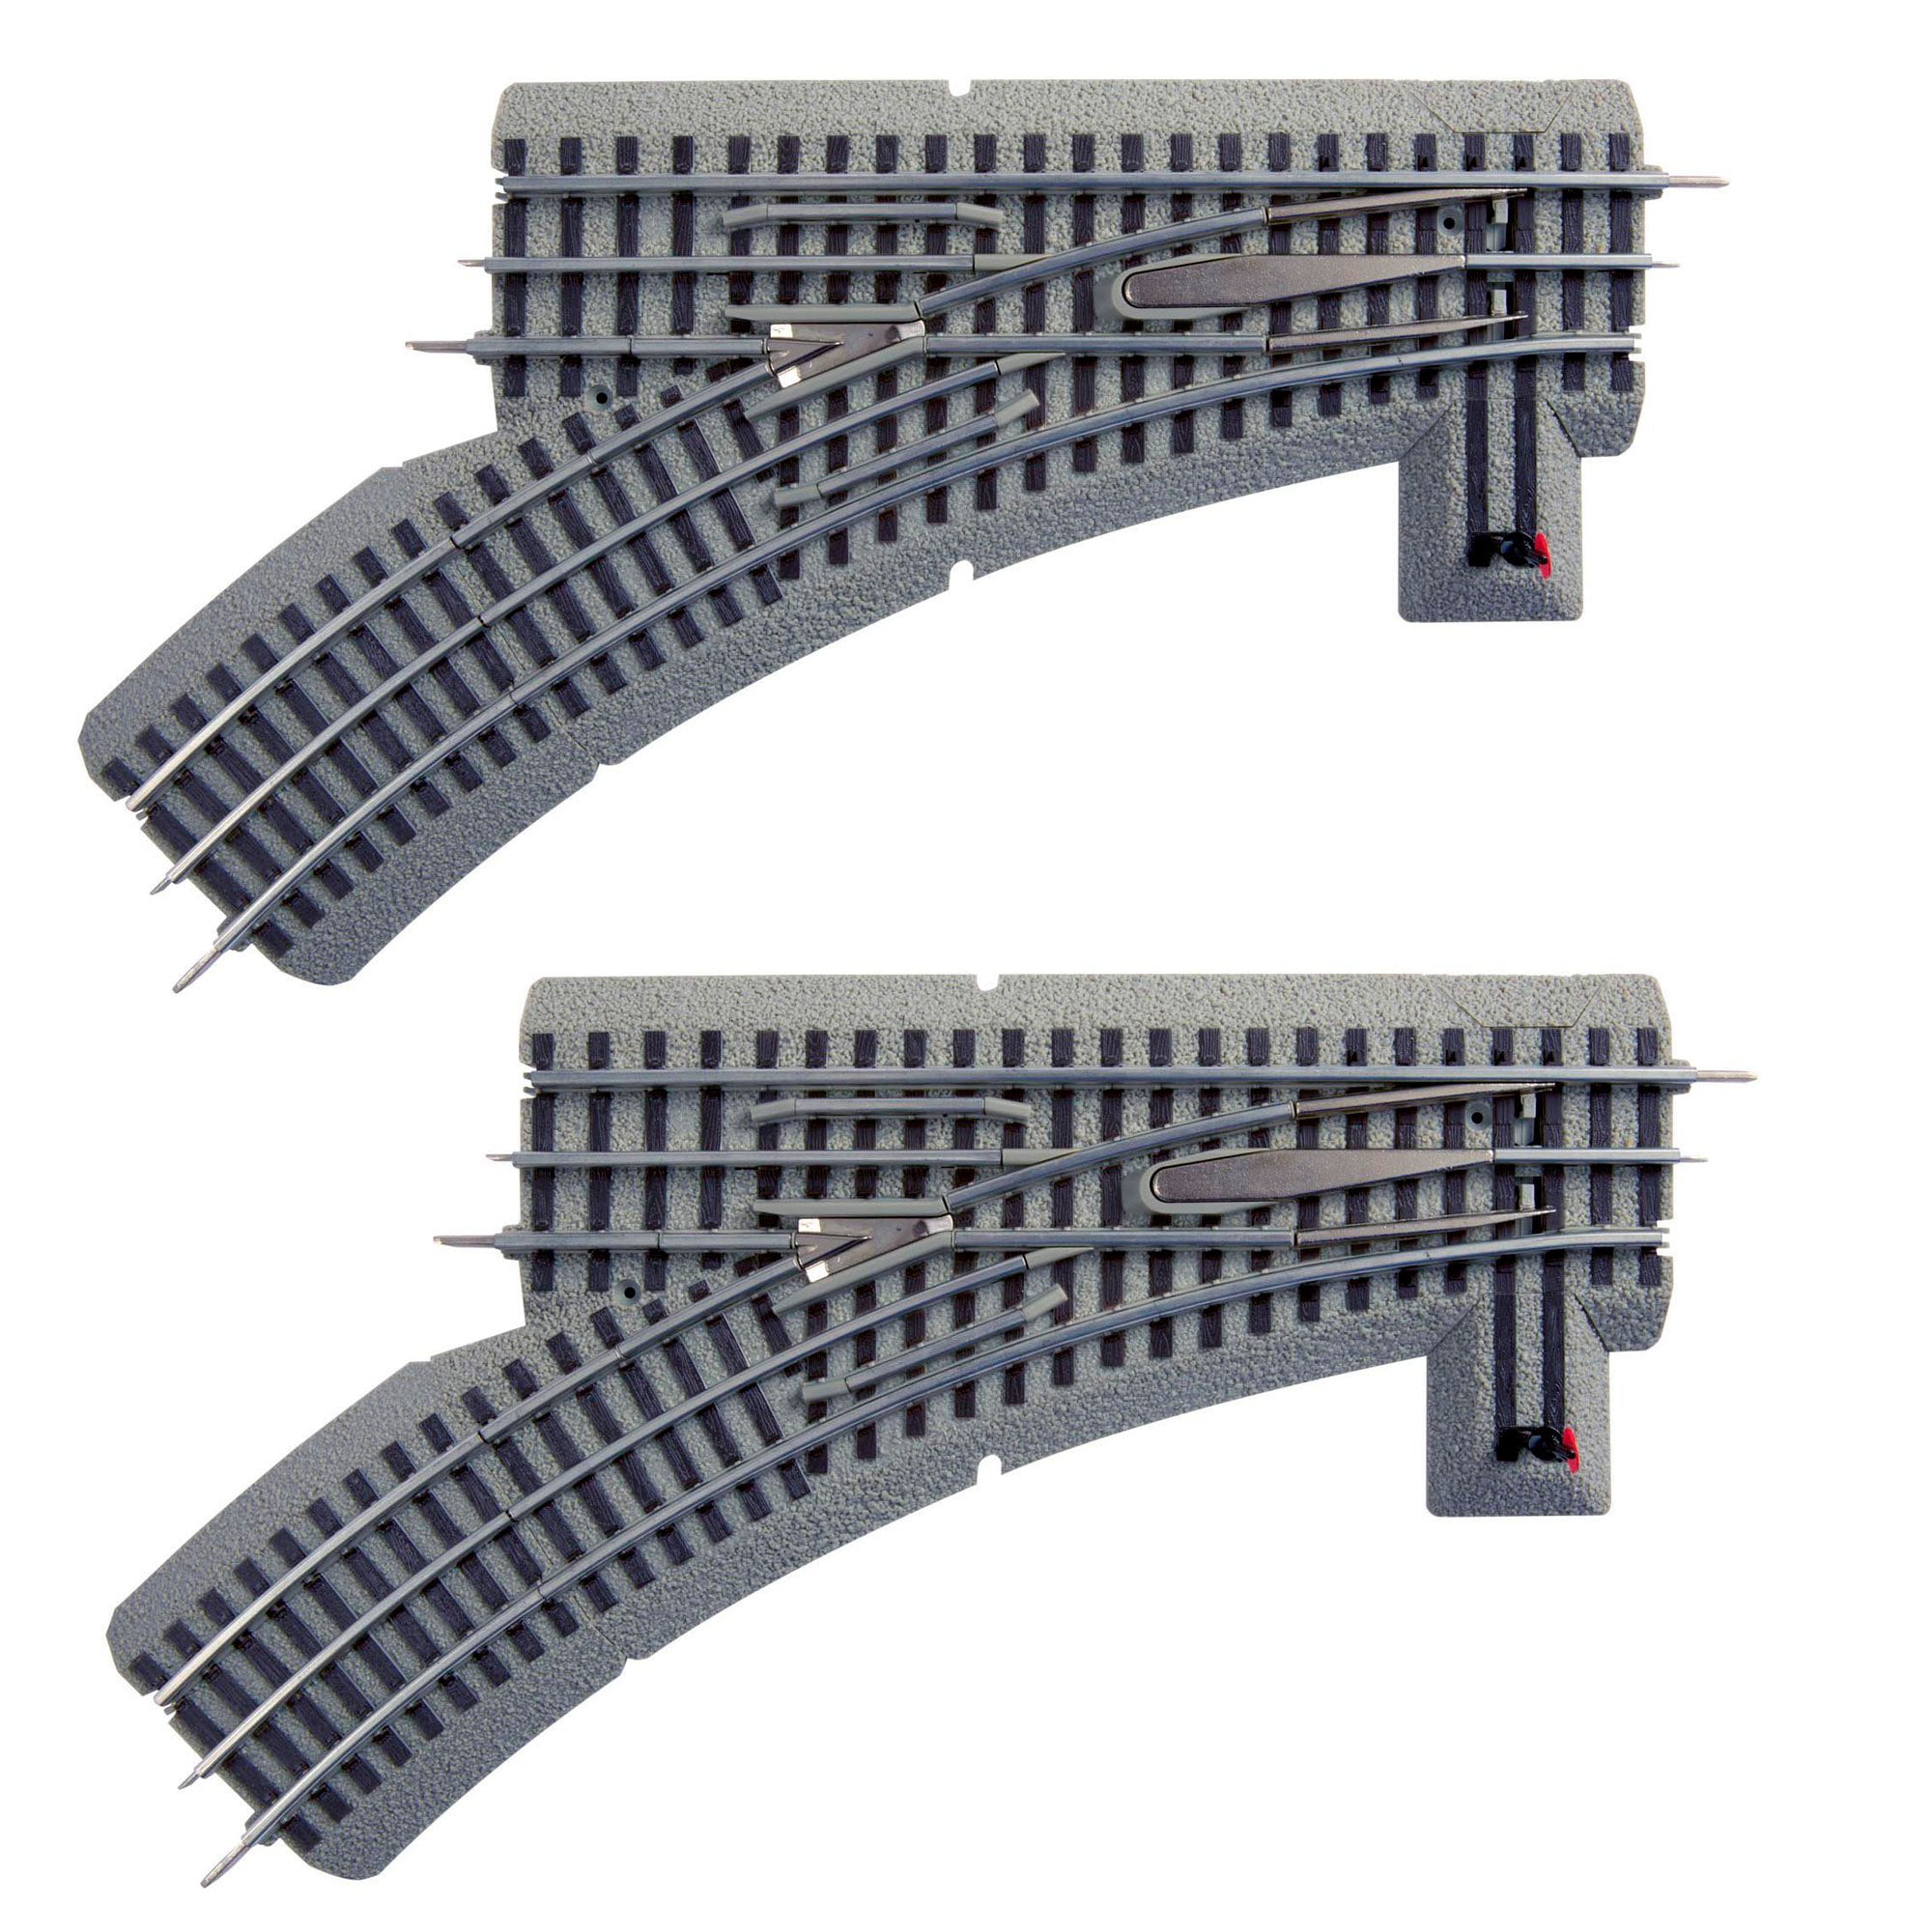 LIONEL CURVE 6 INCH BY 2 INCH READY TO PLAY PLASTIC TRACK BY THE PIECE SALE 